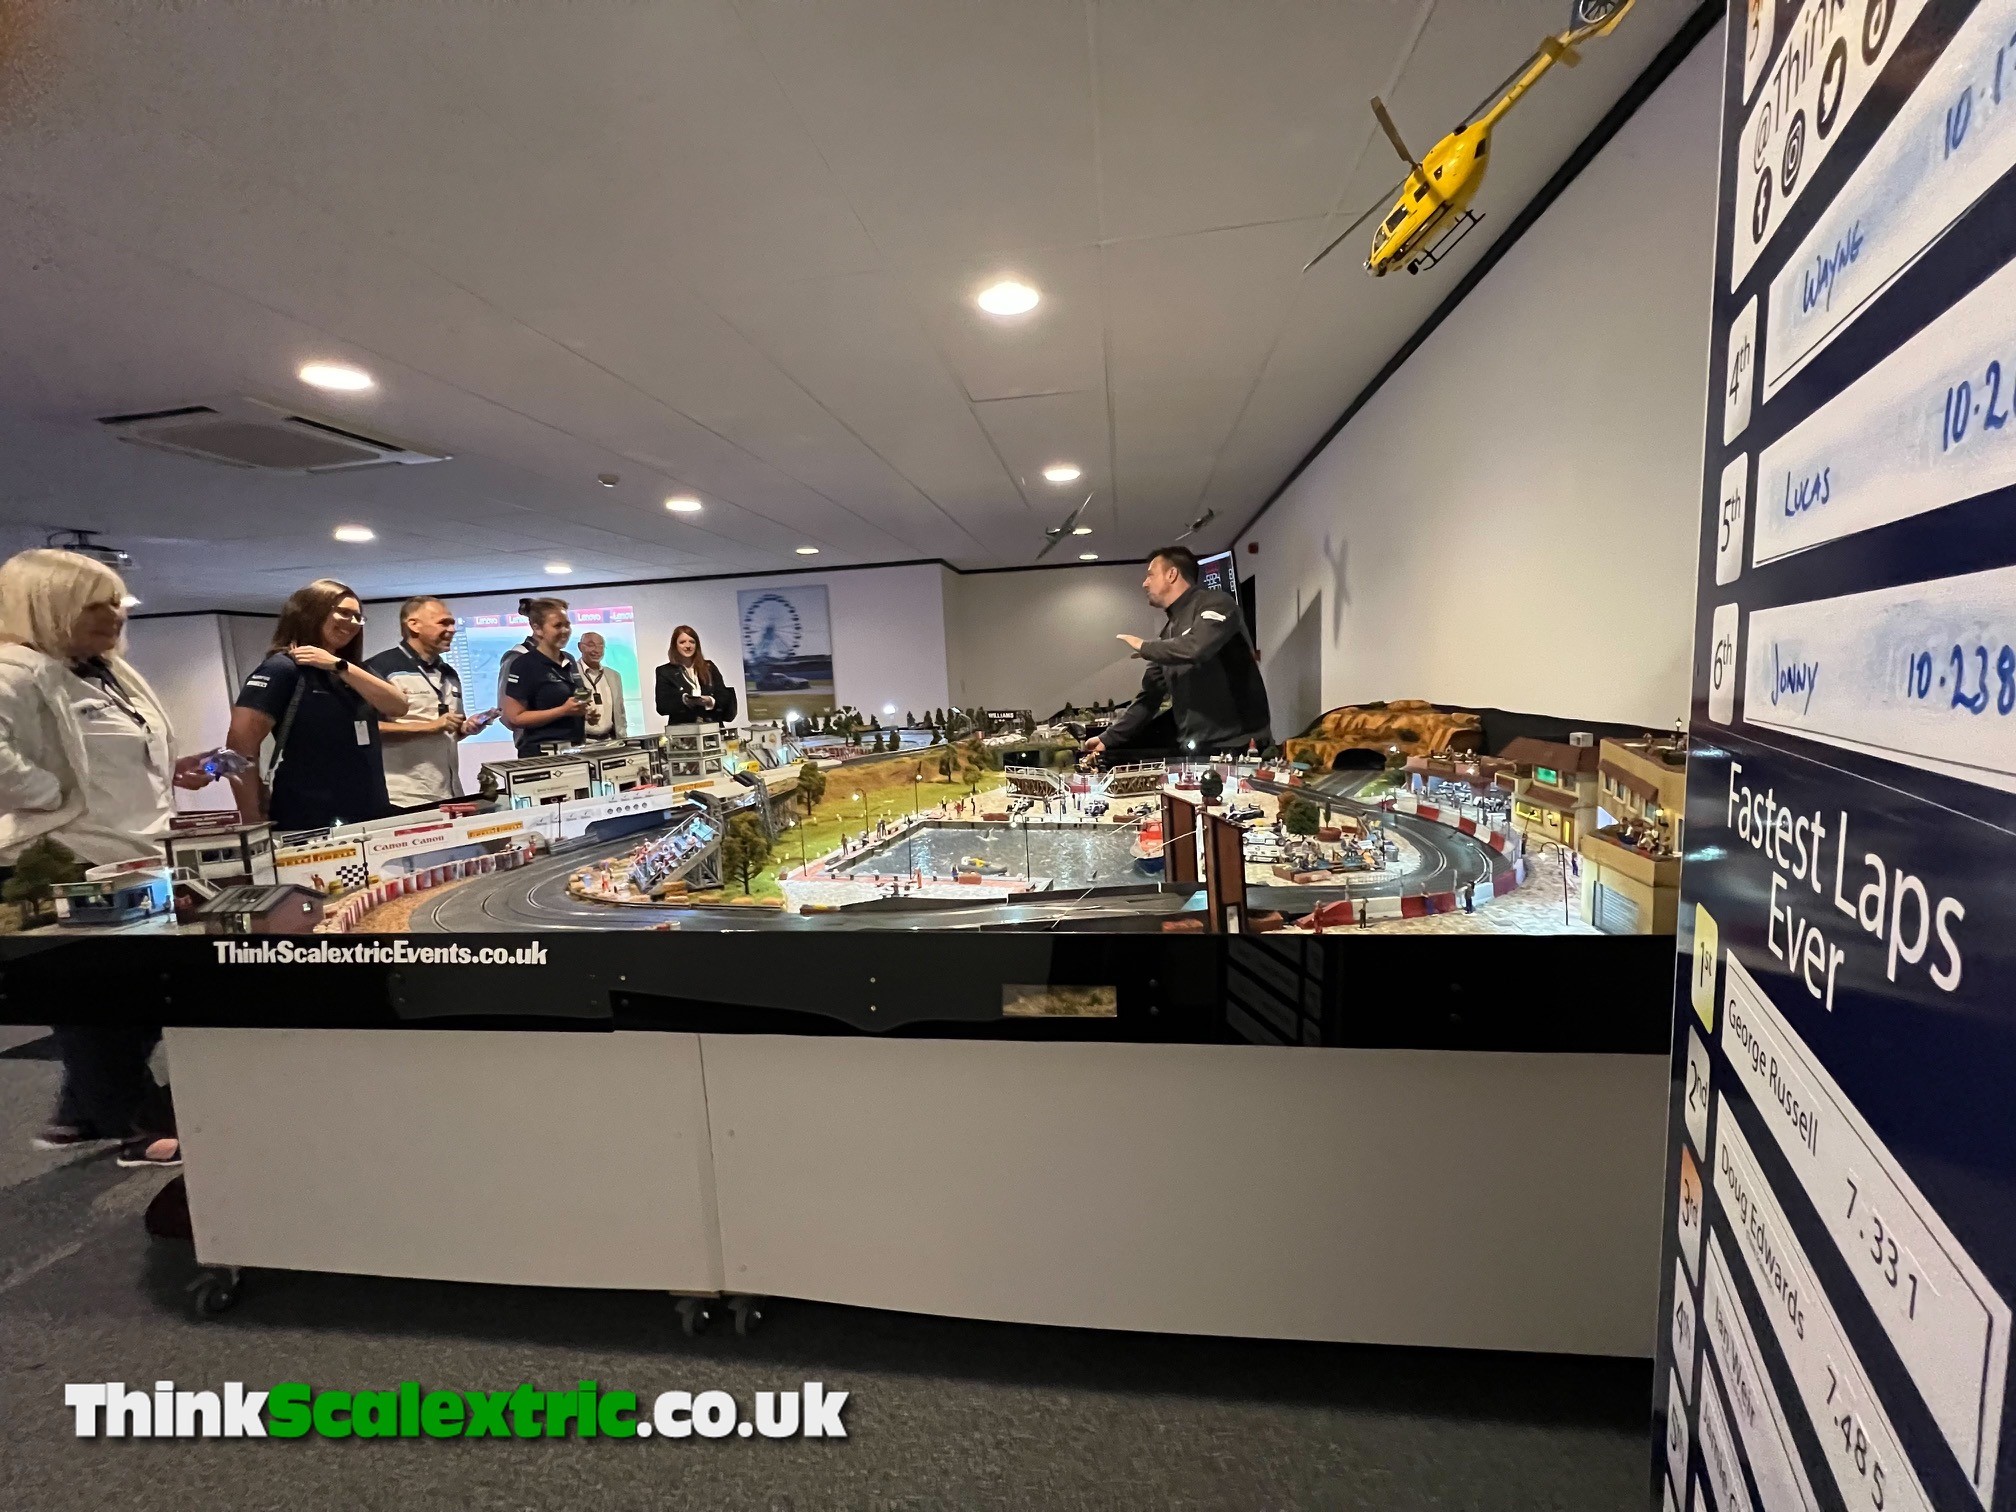 williams racing race day hospitality silverstone f1 gp 2022 giant scalextric bespoke track build